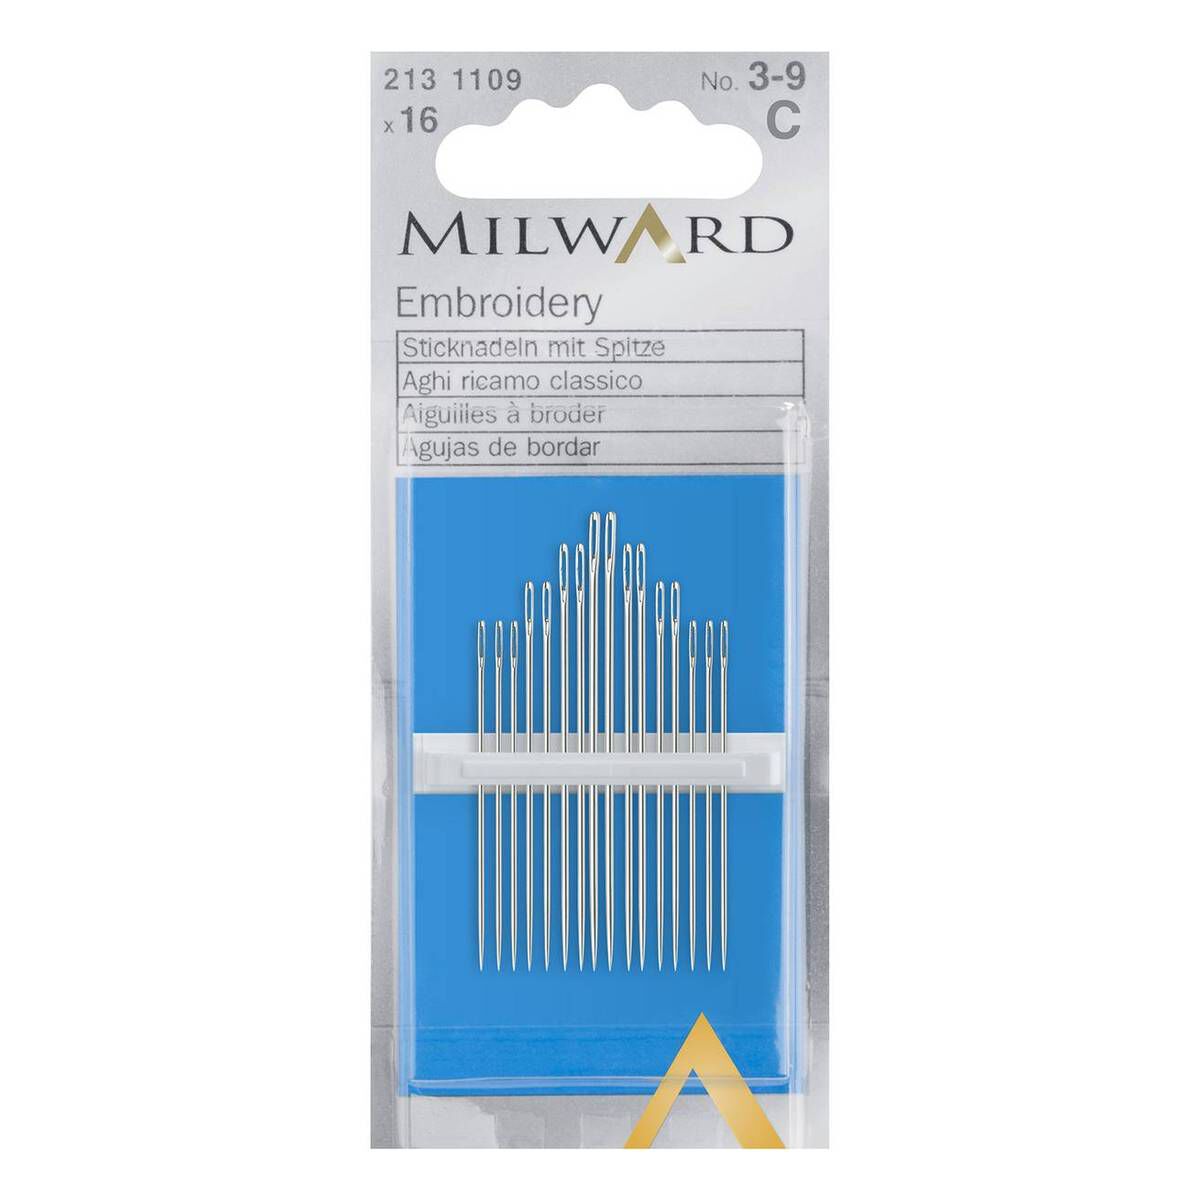 Milward Embroidery Needles No.3-9 16 Pack | Hobbycraft